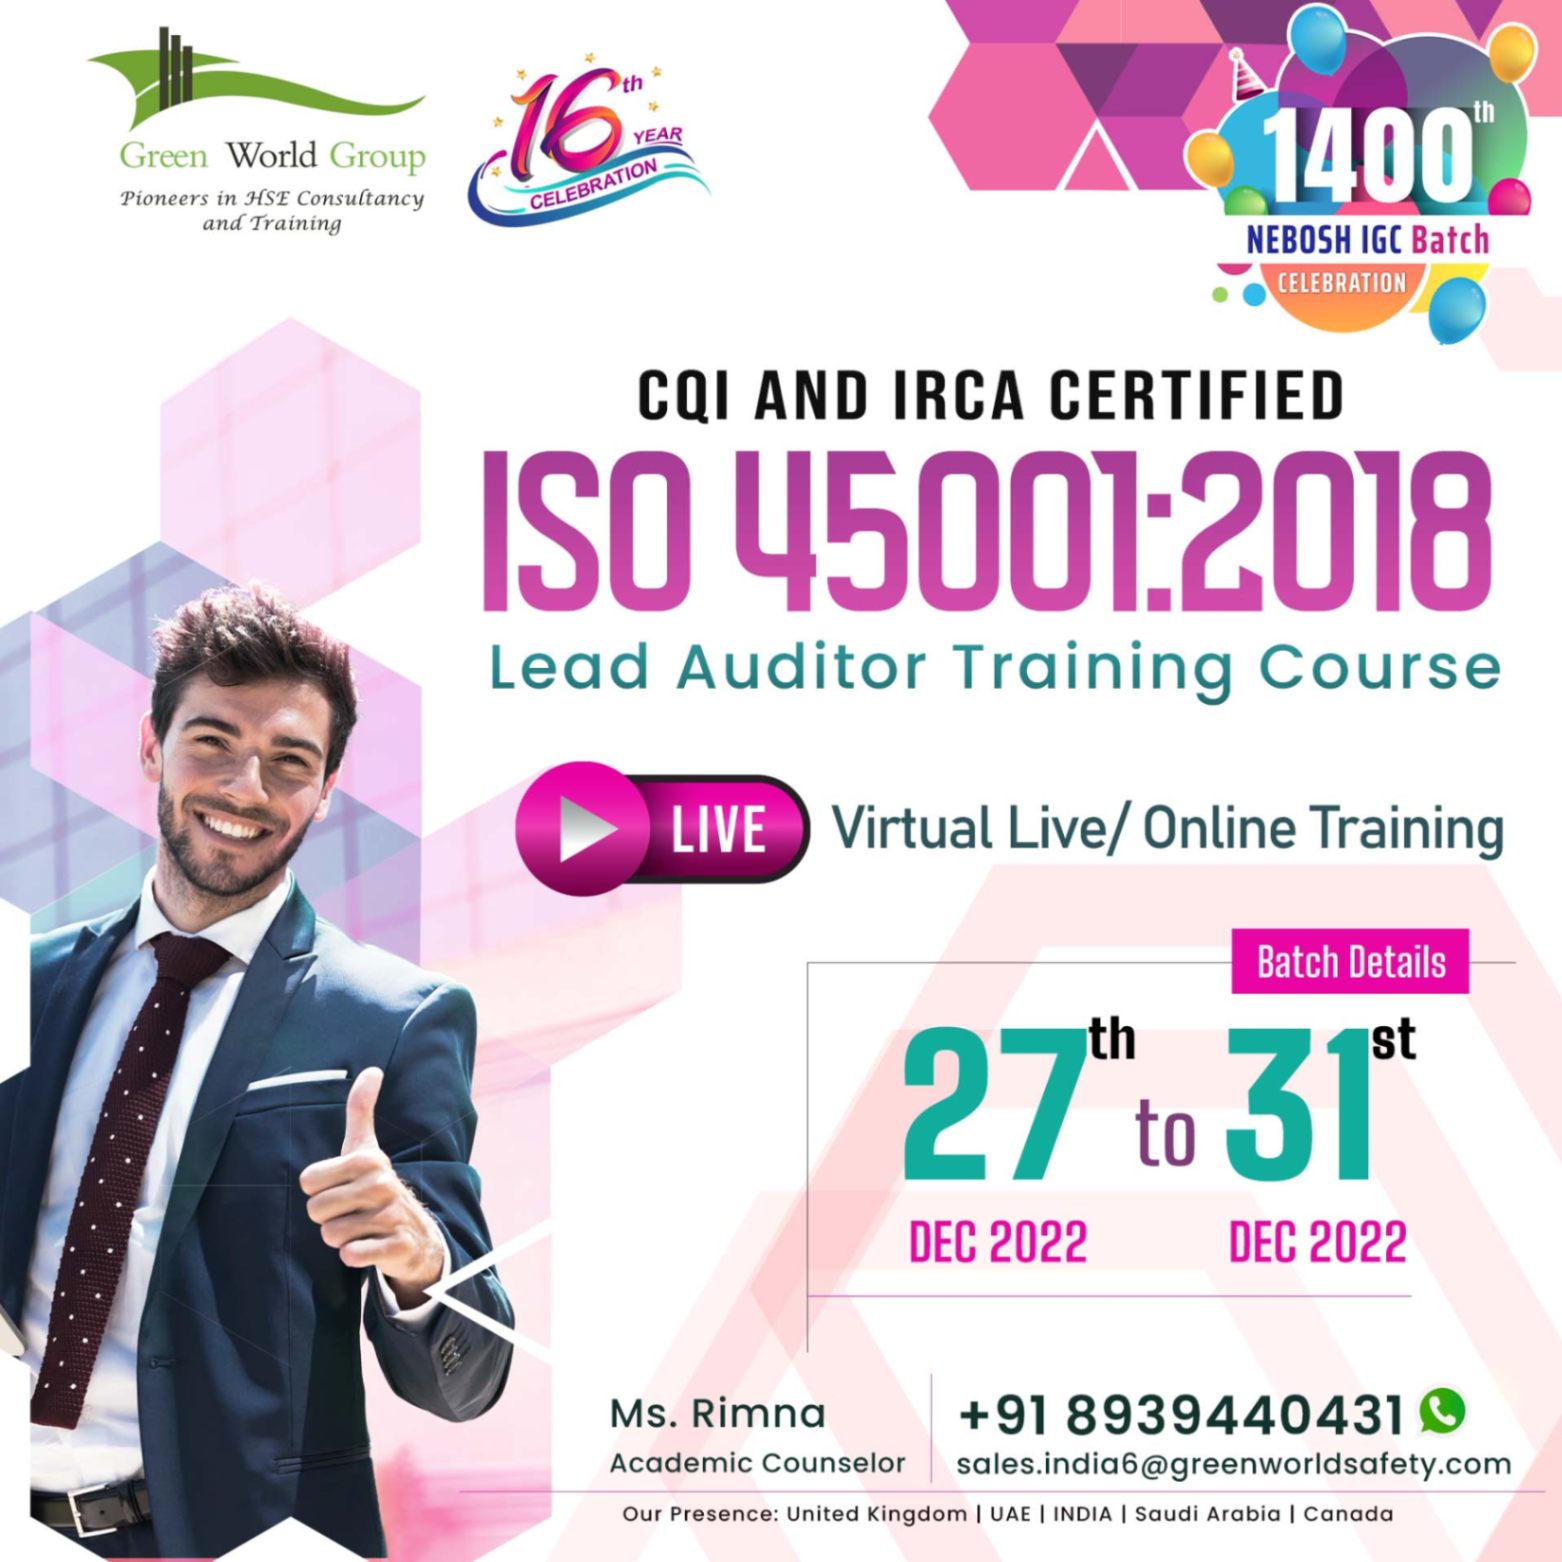 Pursue ISO Lead Auditor Course @ Offer Price